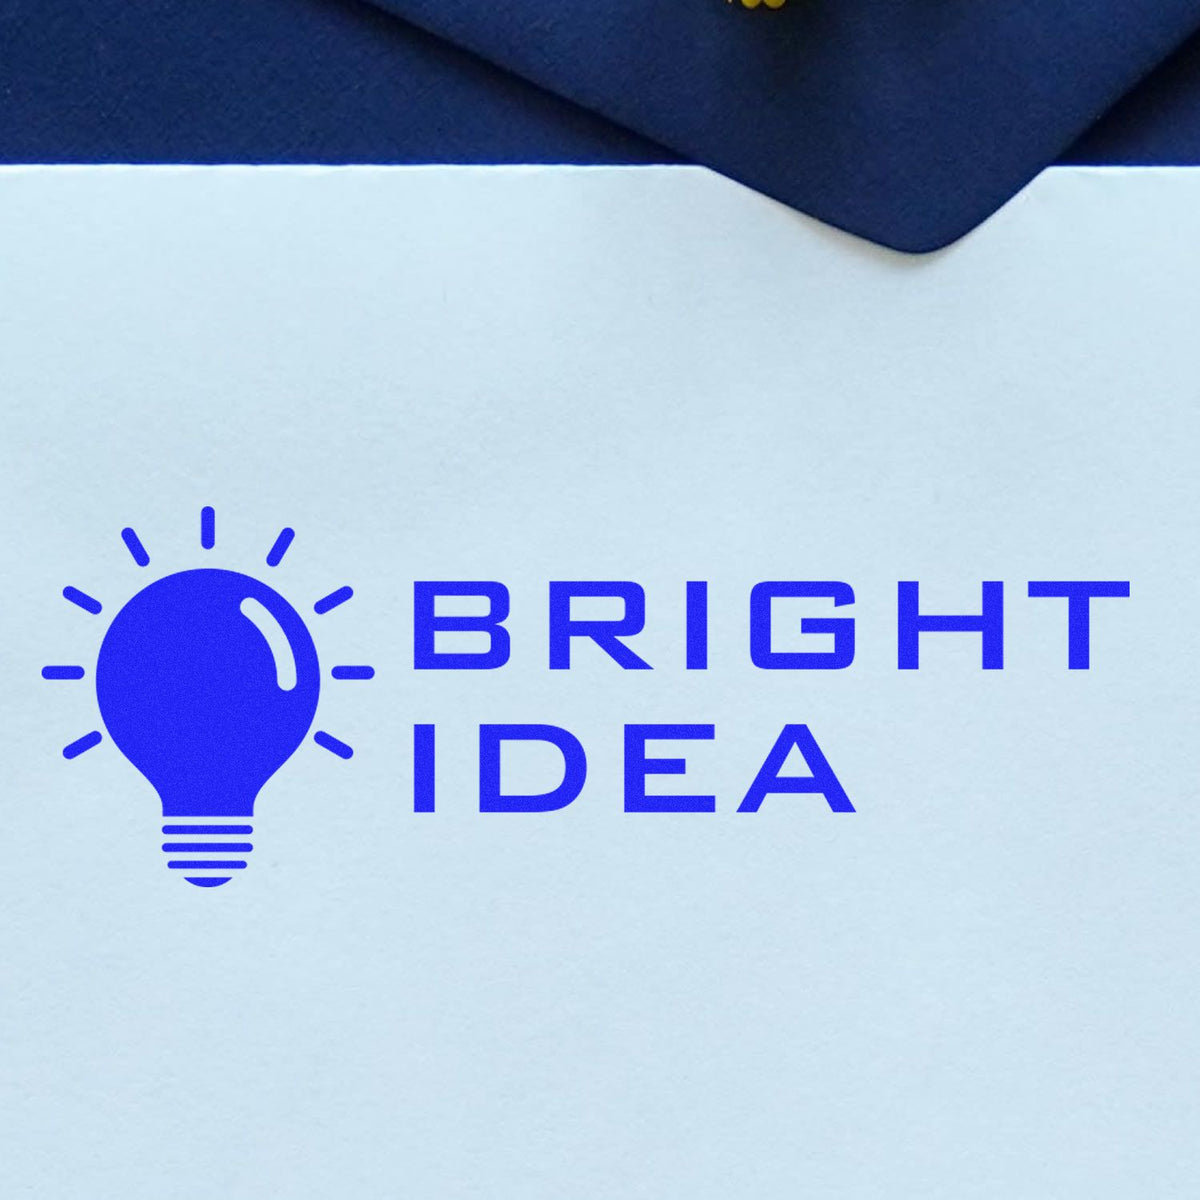 Large Pre-Inked Bright Idea Stamp In Use Photo